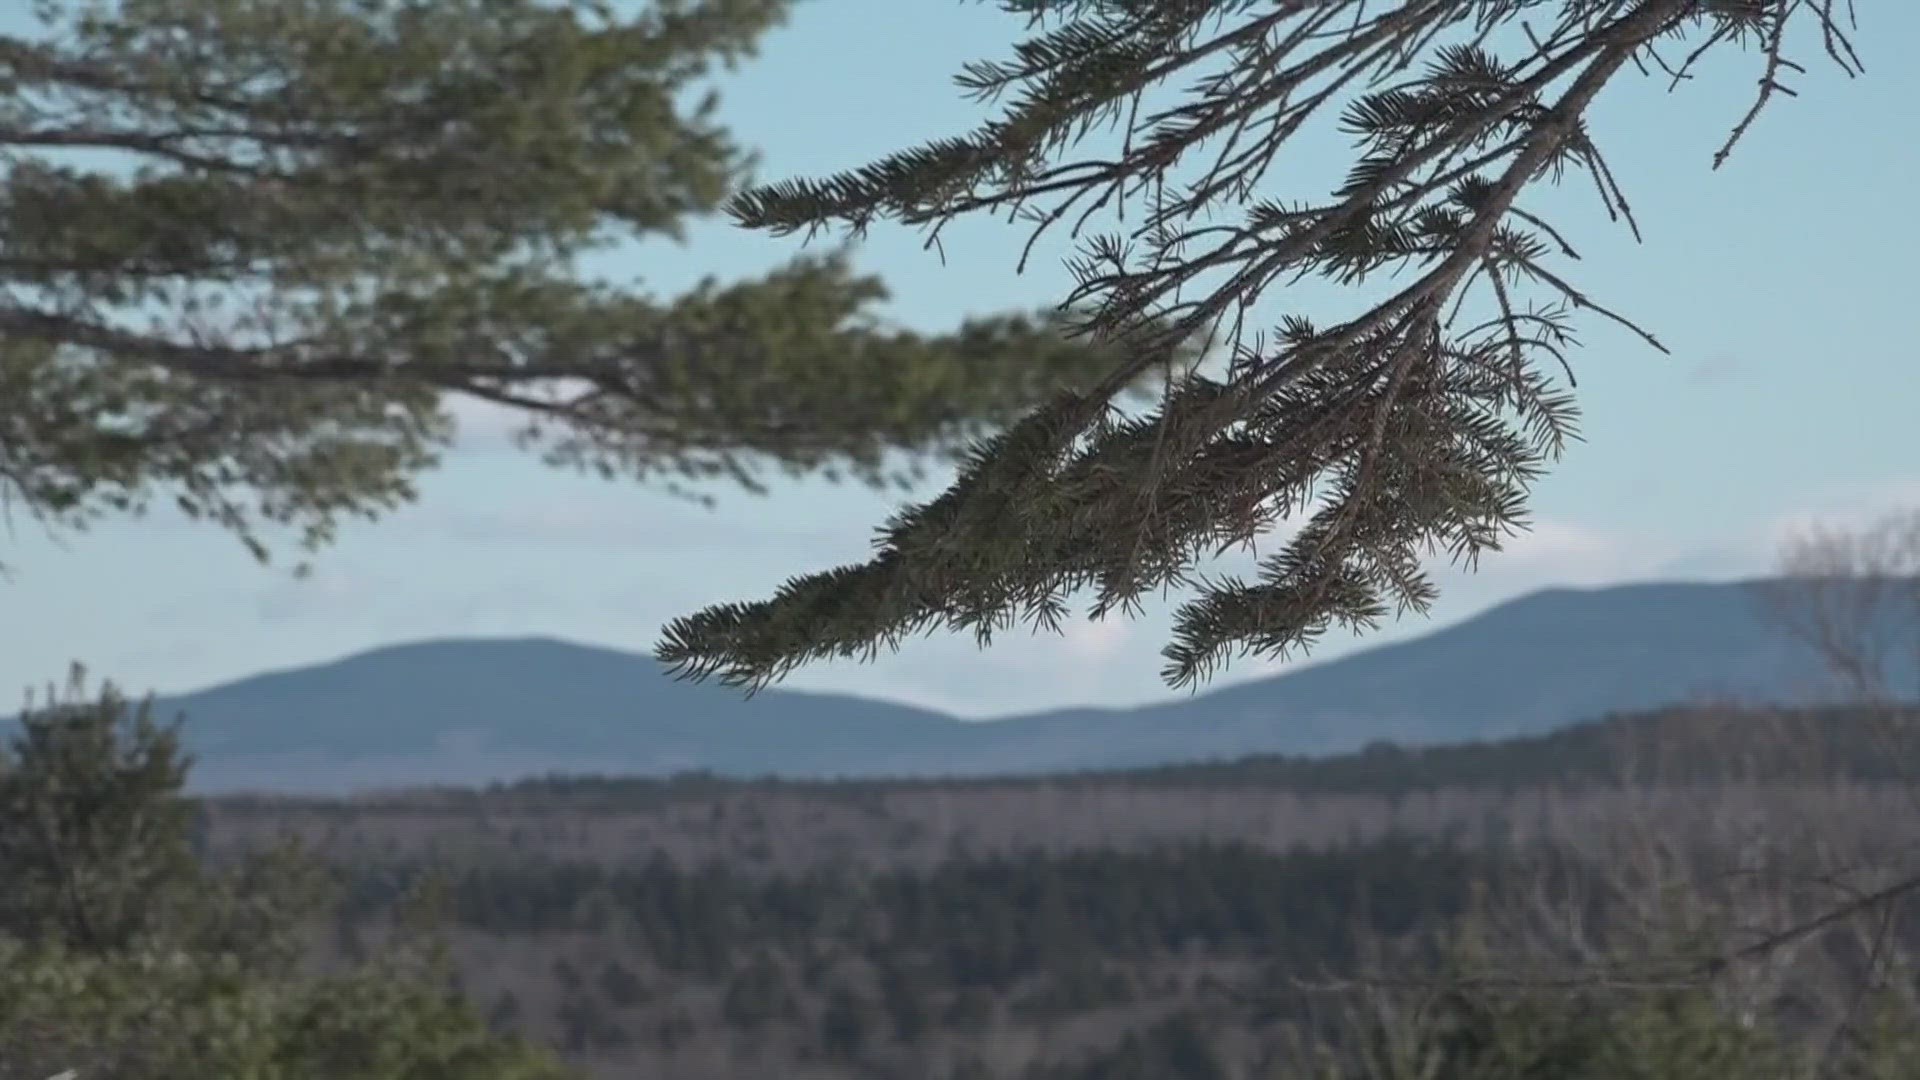 The land runs across Scammon Ridge, which separates the Kennebec and Penobscot River watersheds in Piscataquis County, now forever open to the public for recreation.